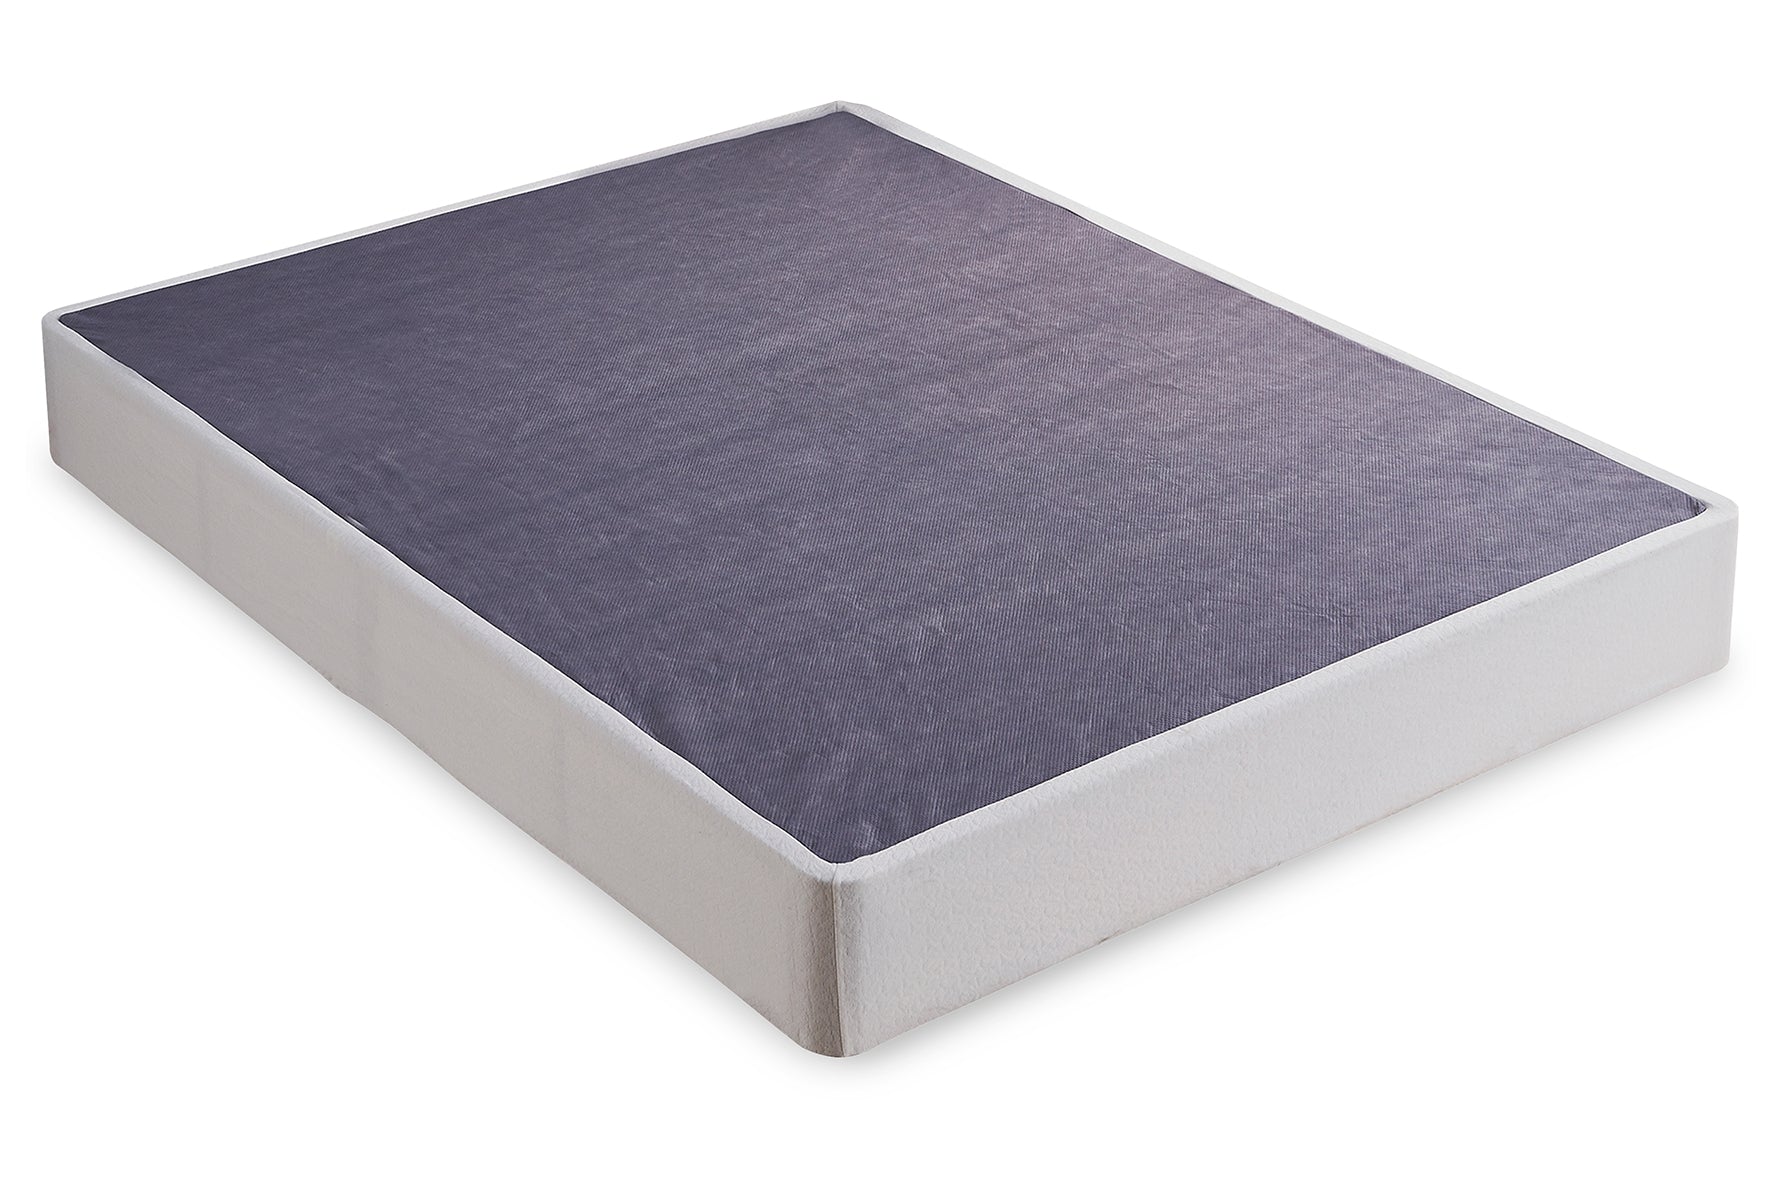 Chime 12 Inch Hybrid Mattress with Foundation